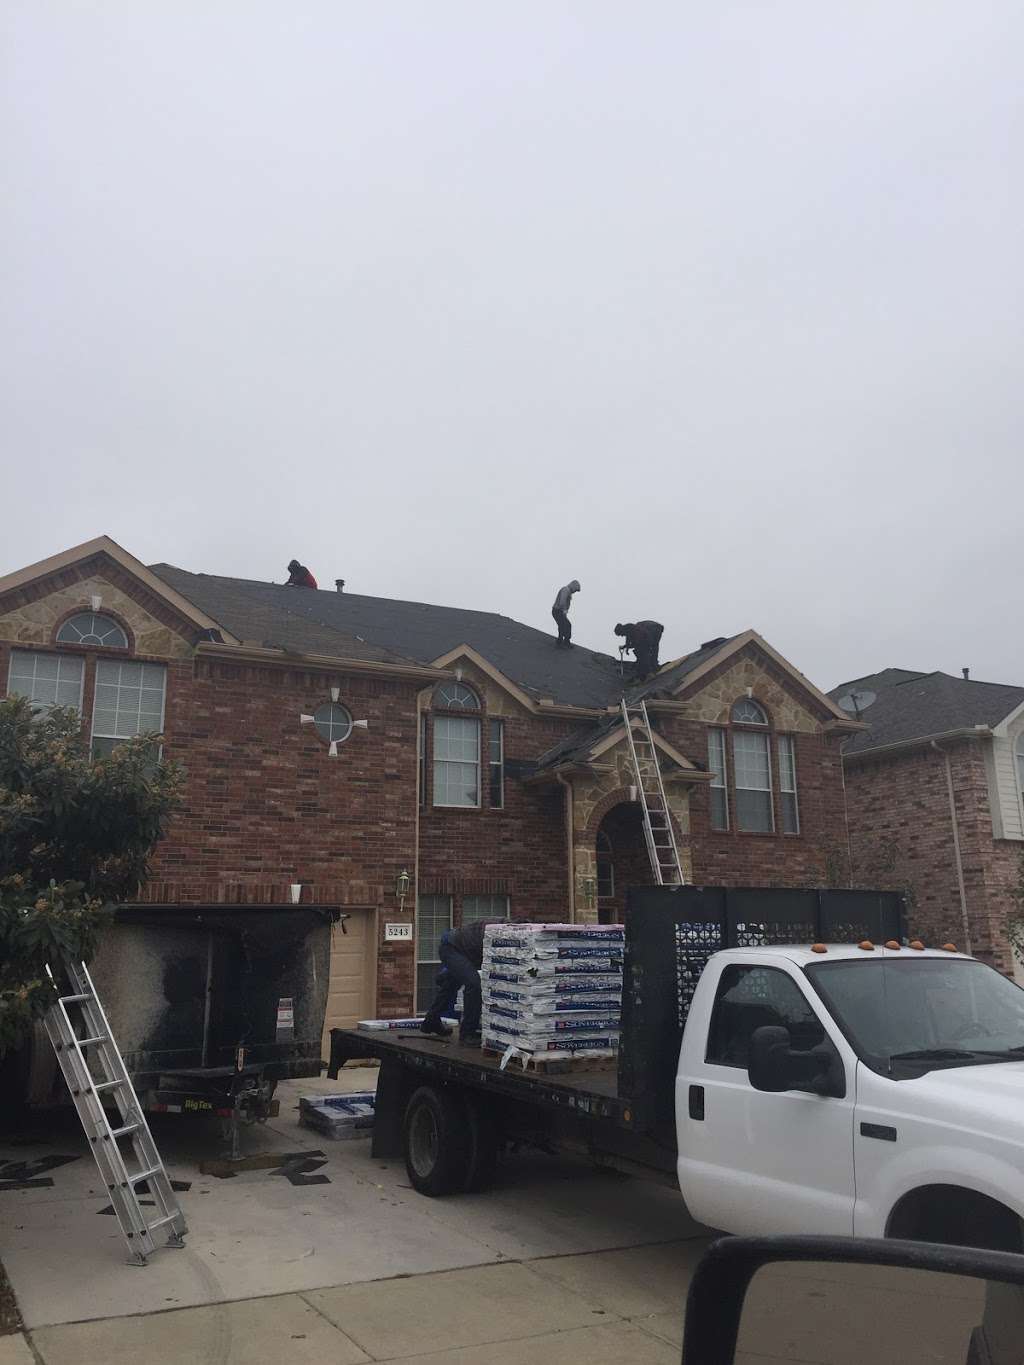 Dalco Contractors & Roofing | 1326 Ashbrook Dr, Grand Prairie, TX 75052 | Phone: (214) 632-7177